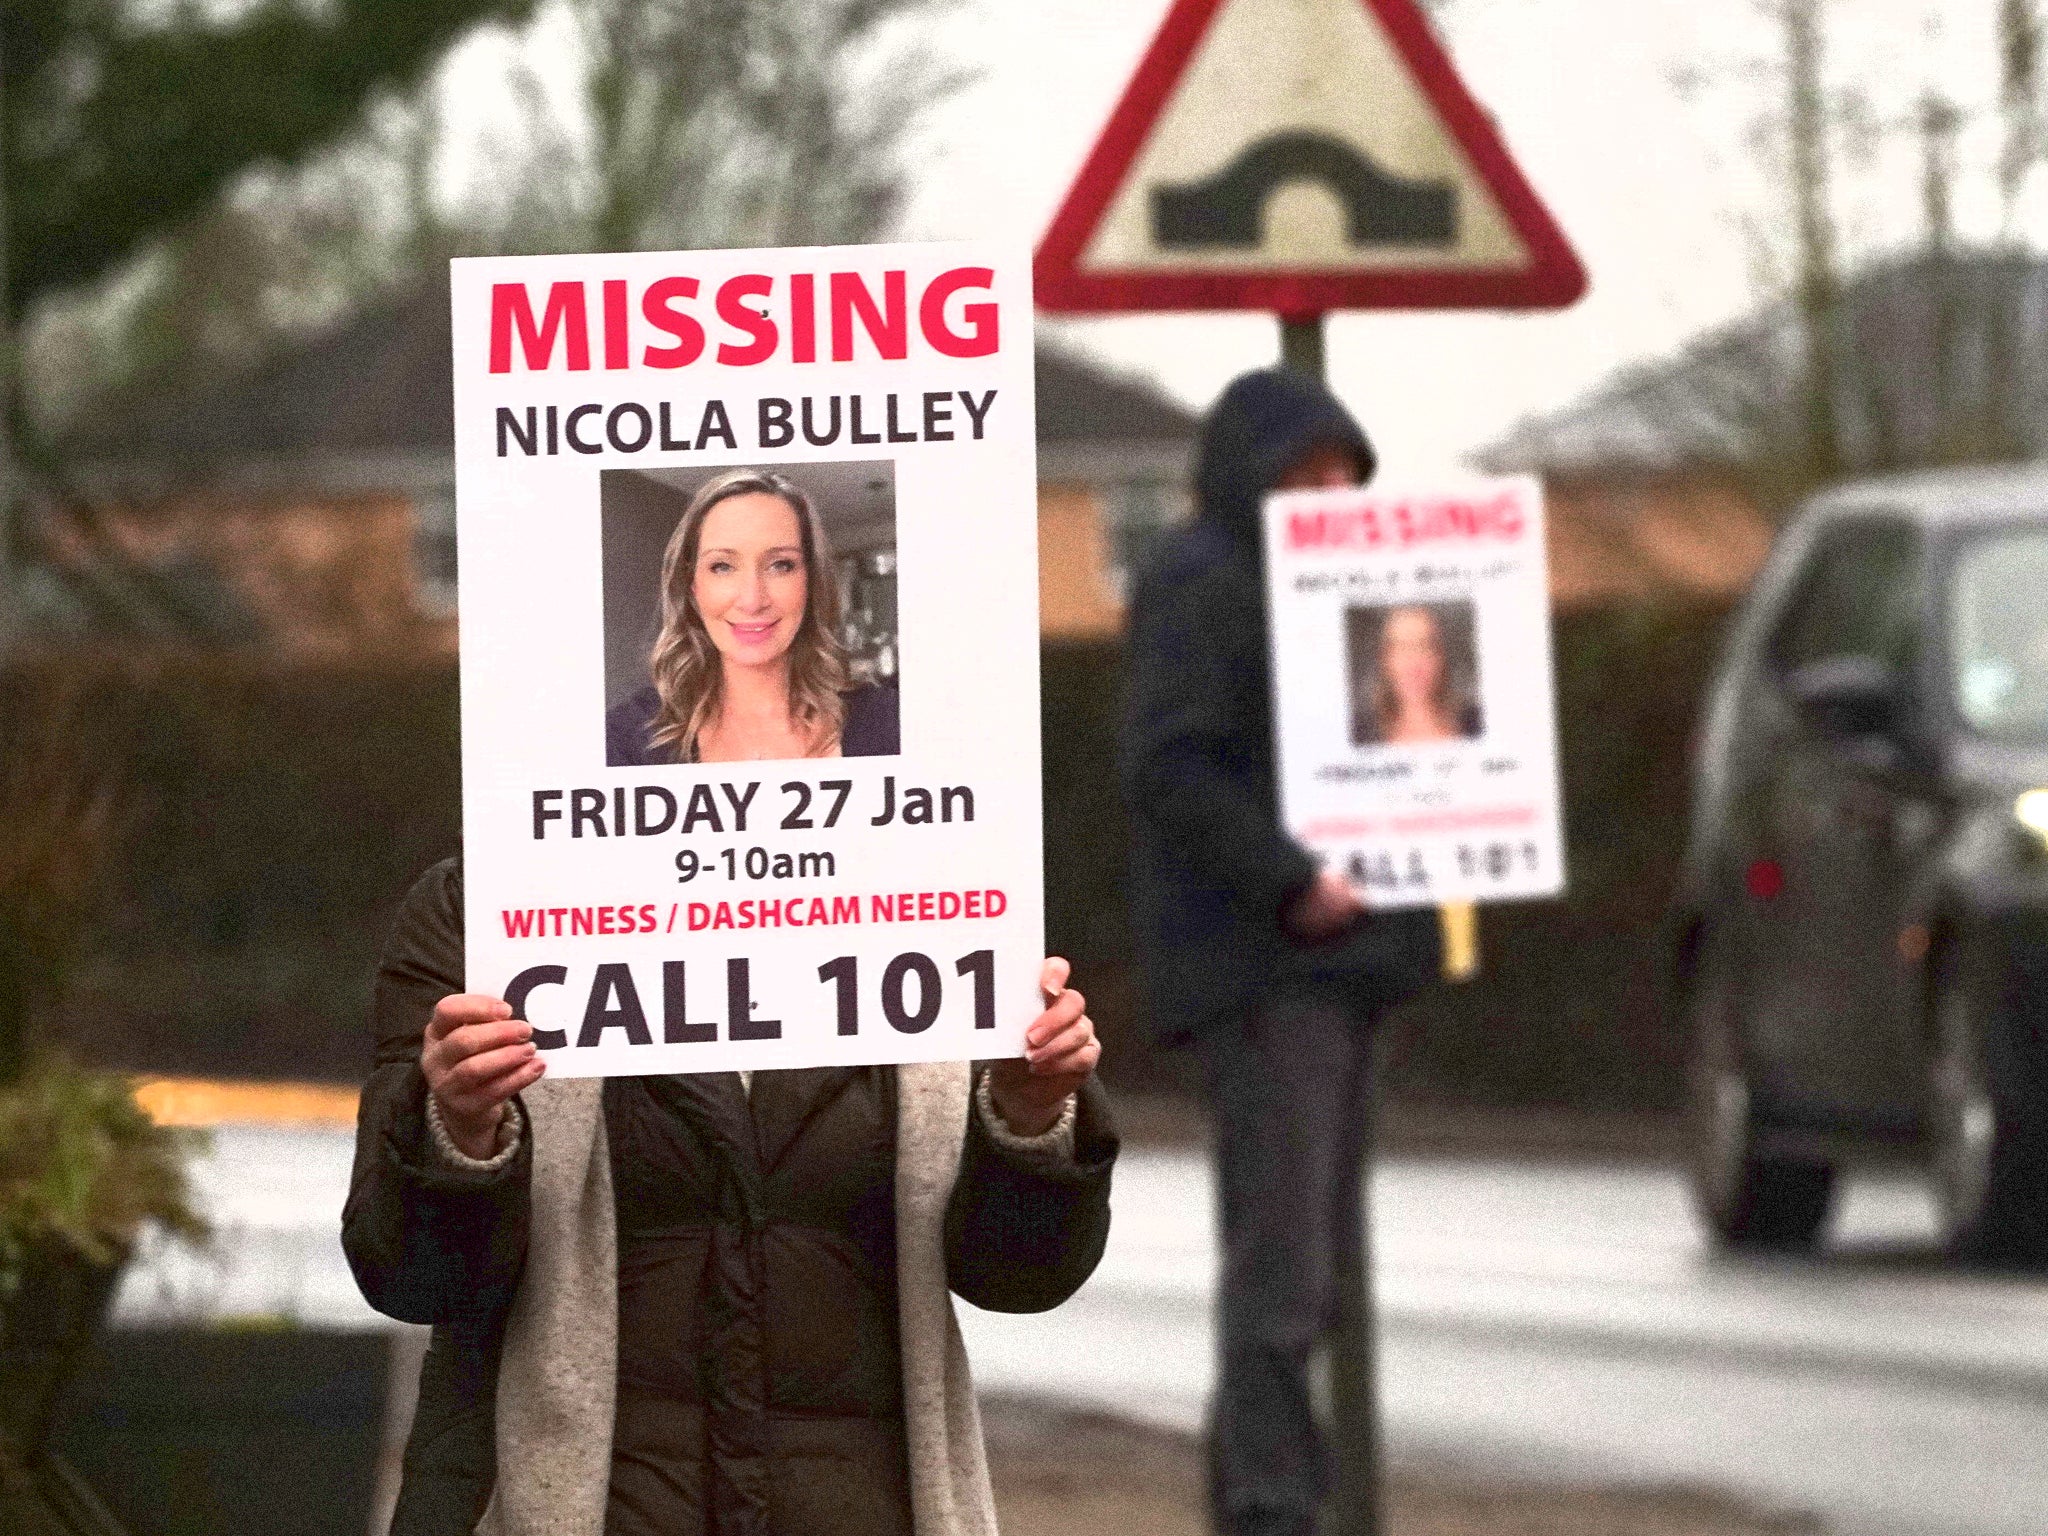 Missing person posters depicting Nicola Bulley are held along a roadside in St Michael’s on Wyre, Lancashire